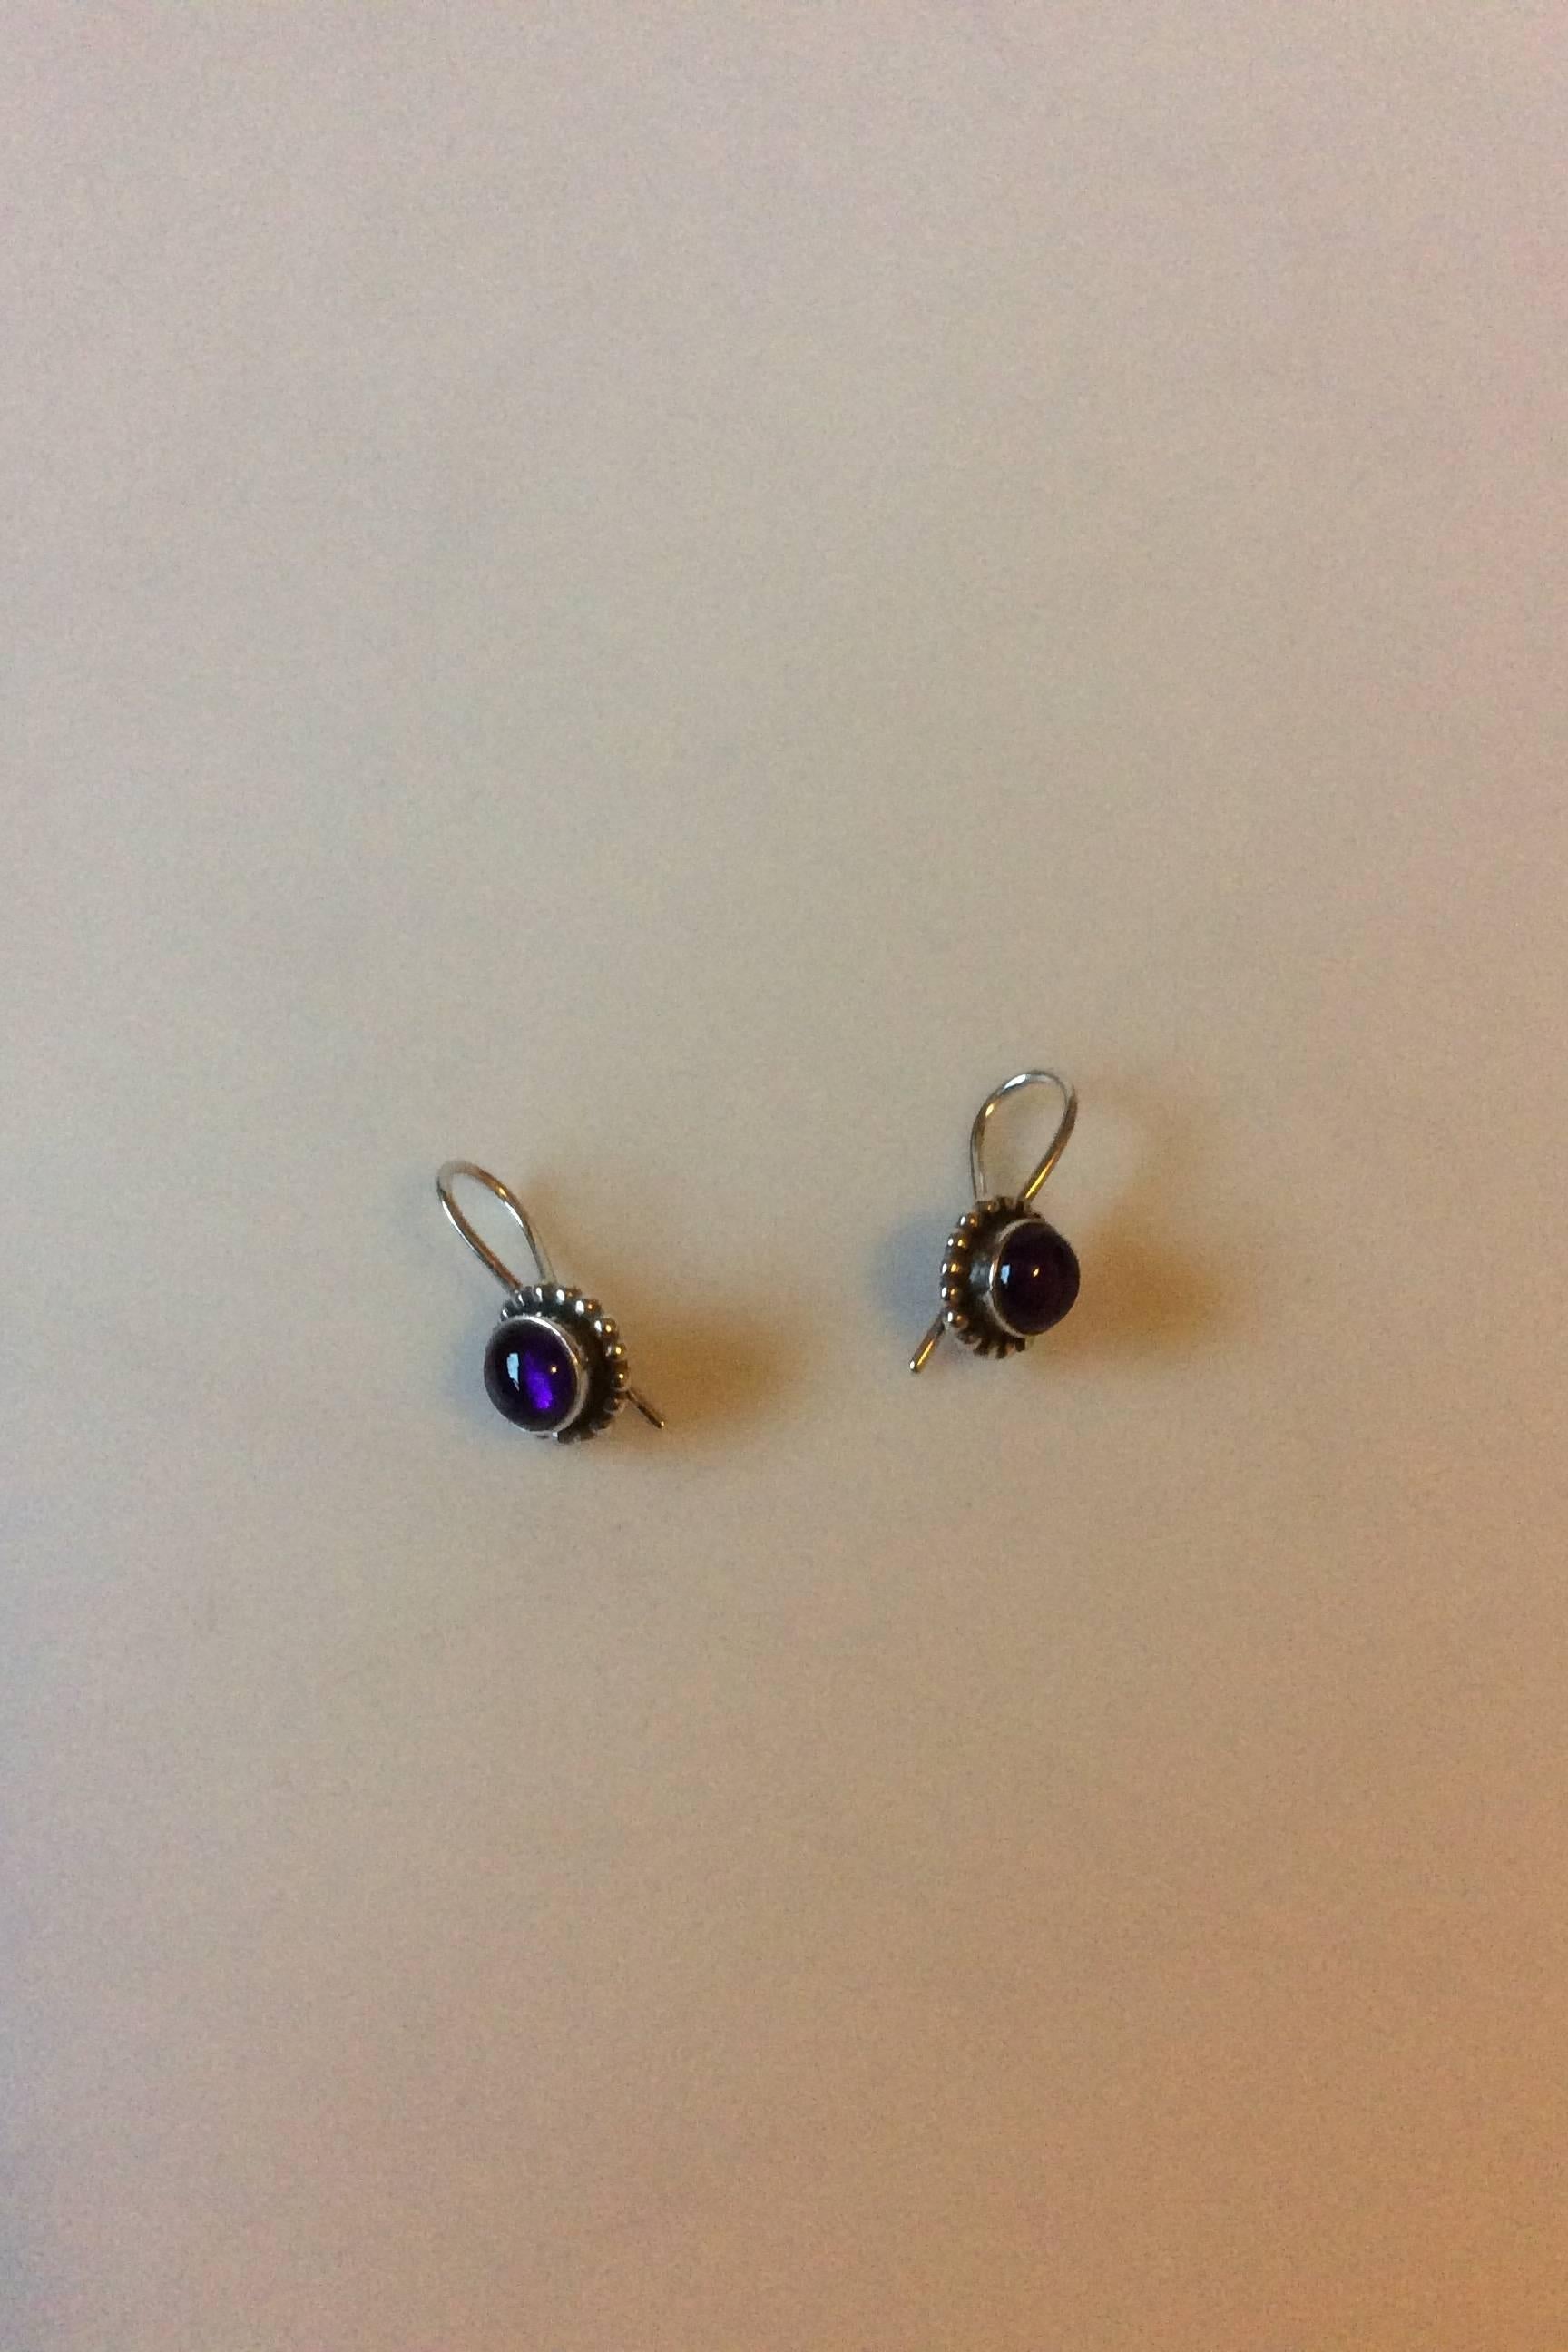 Georg Jensen Sterling Silver Earrings, Moonlight Blossom No 9 with purple stone. Measures 2 cm / 3/4 in. Weighs under 0.20 oz